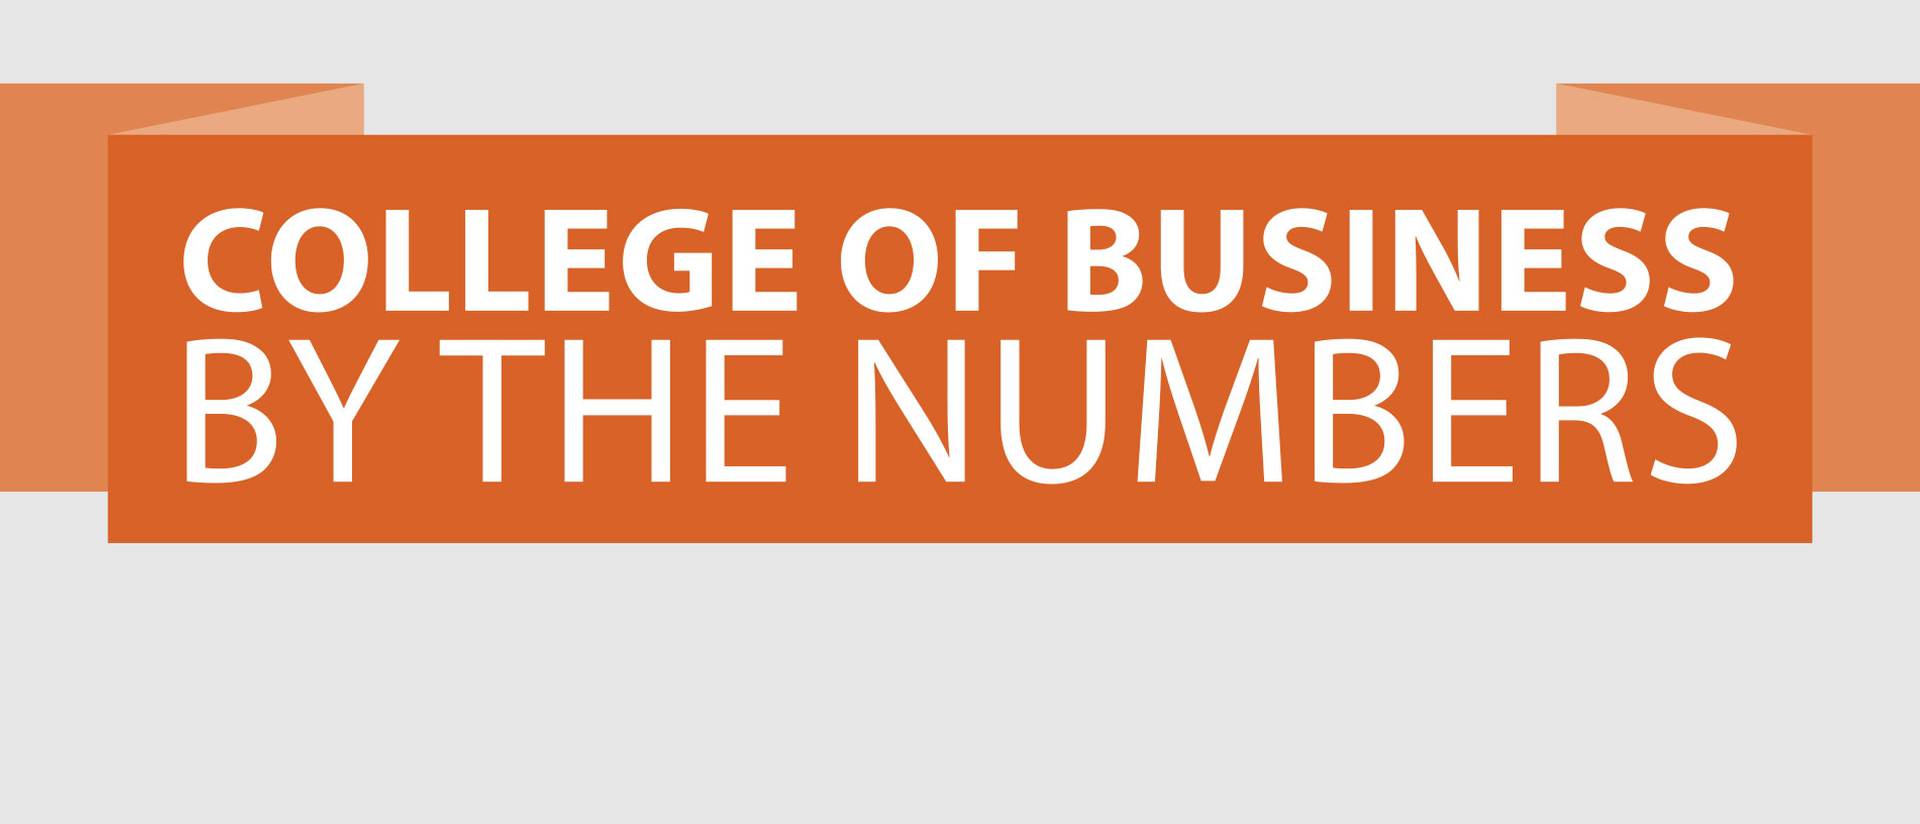 College of Business by the Numbers